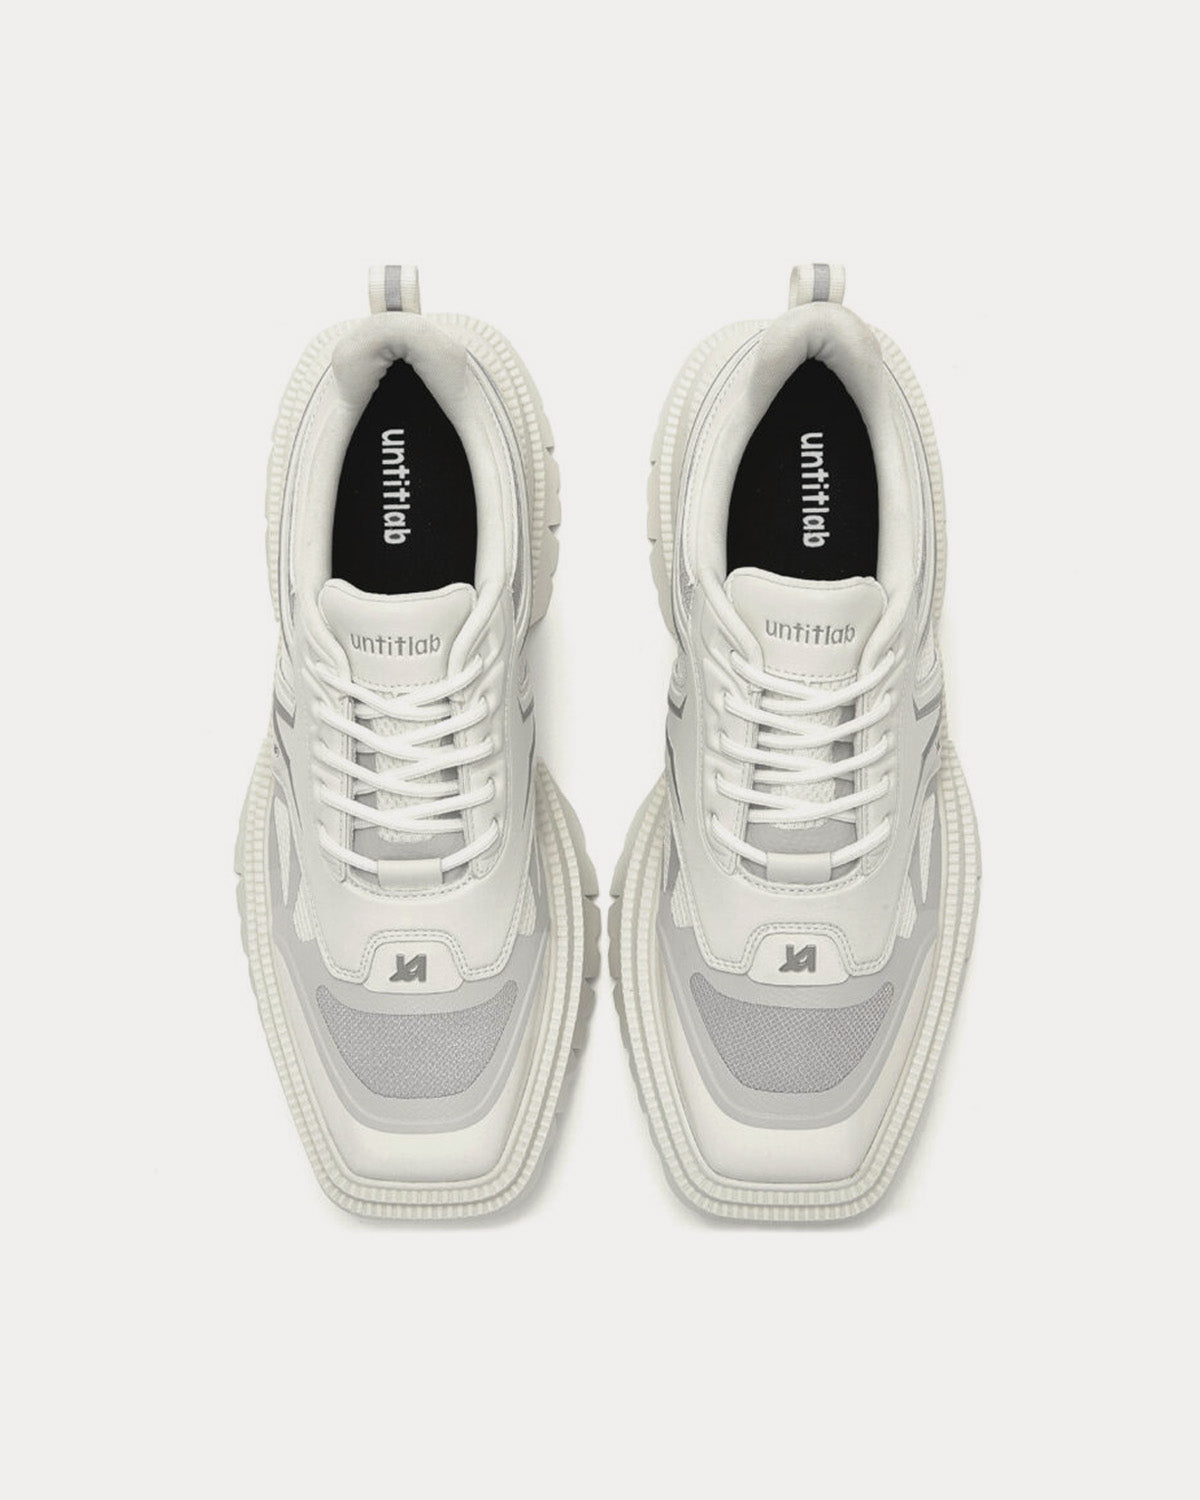 Untitlab - untitled#12 Vary White Low Top Sneakers